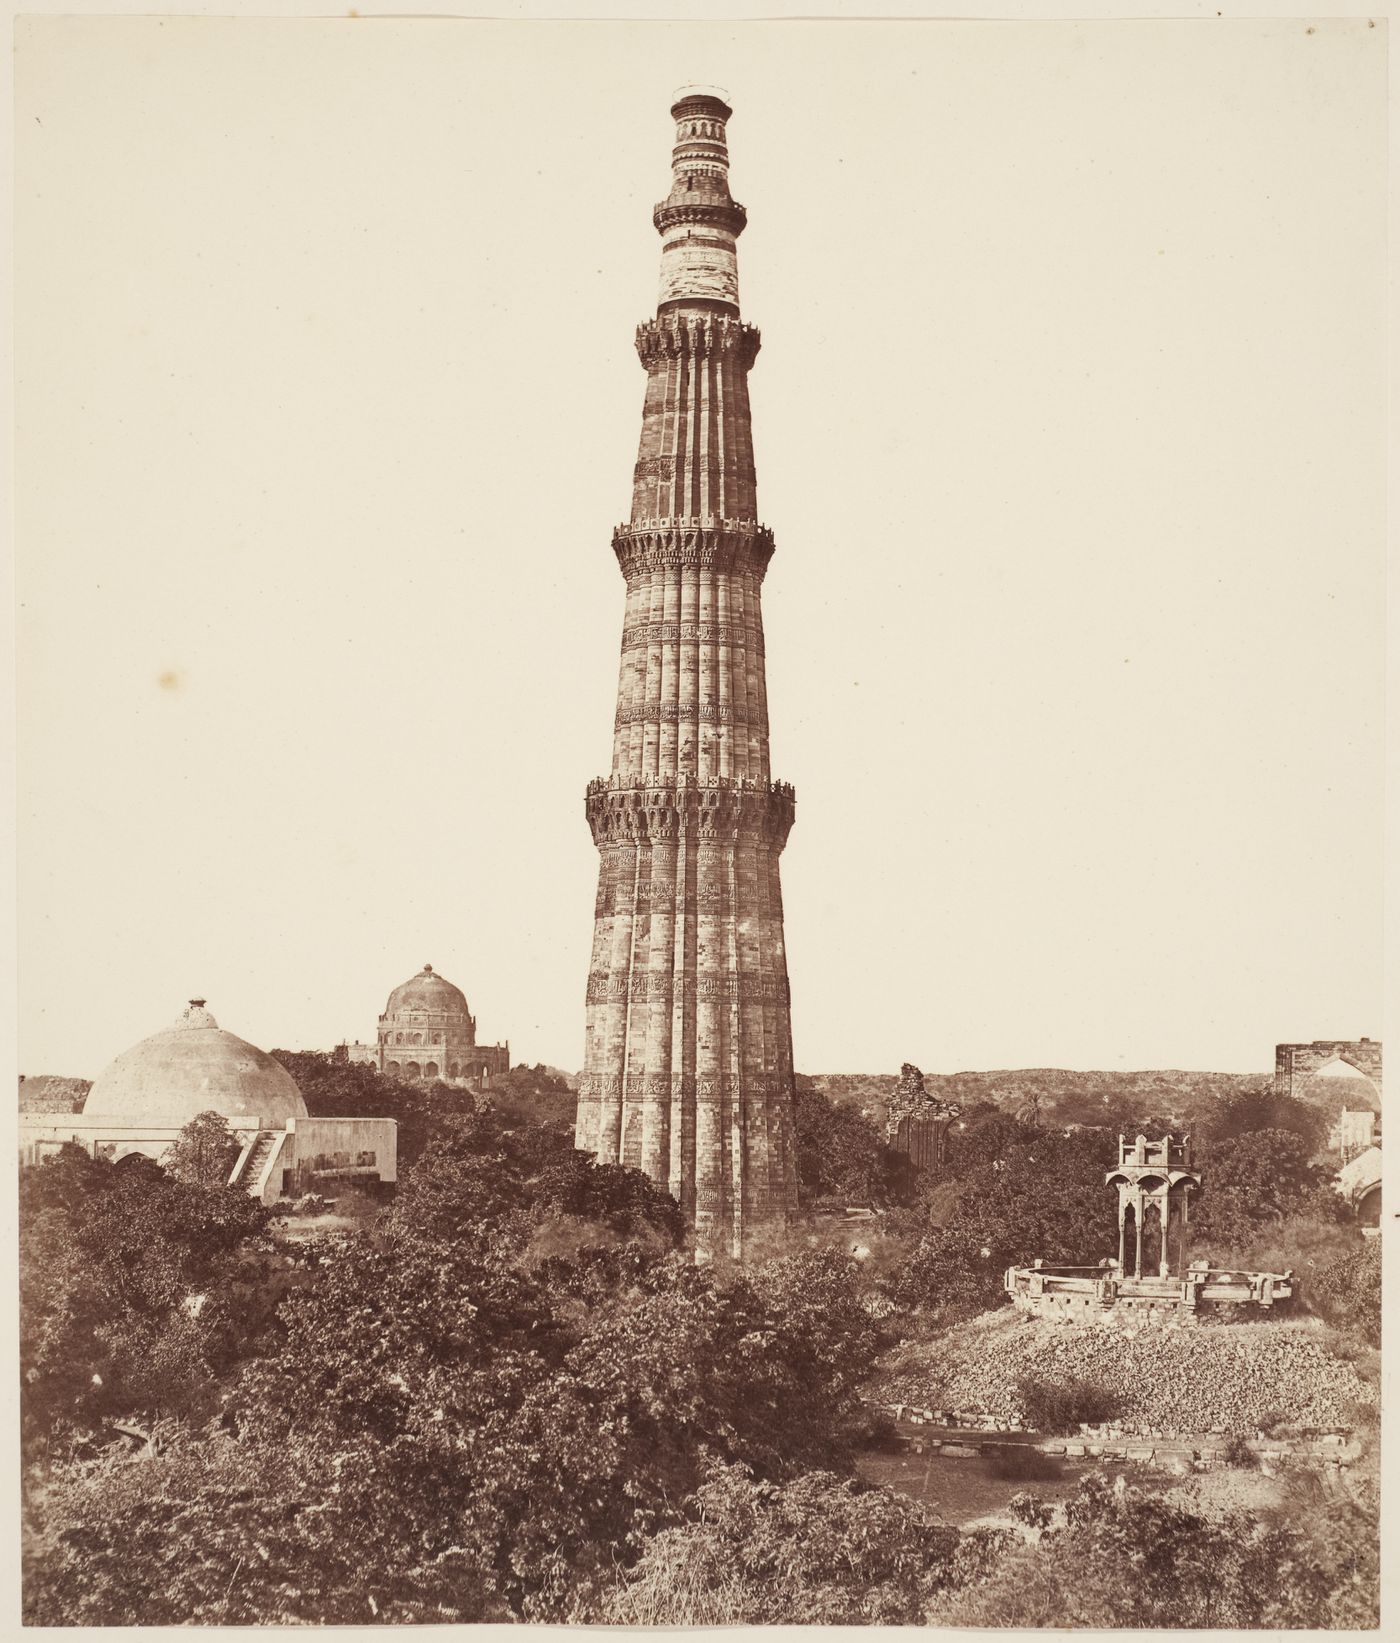 View of the Qutb Minar showing the tombs of Ala-ud-Din and Iltutmish on the left, Delhi, India